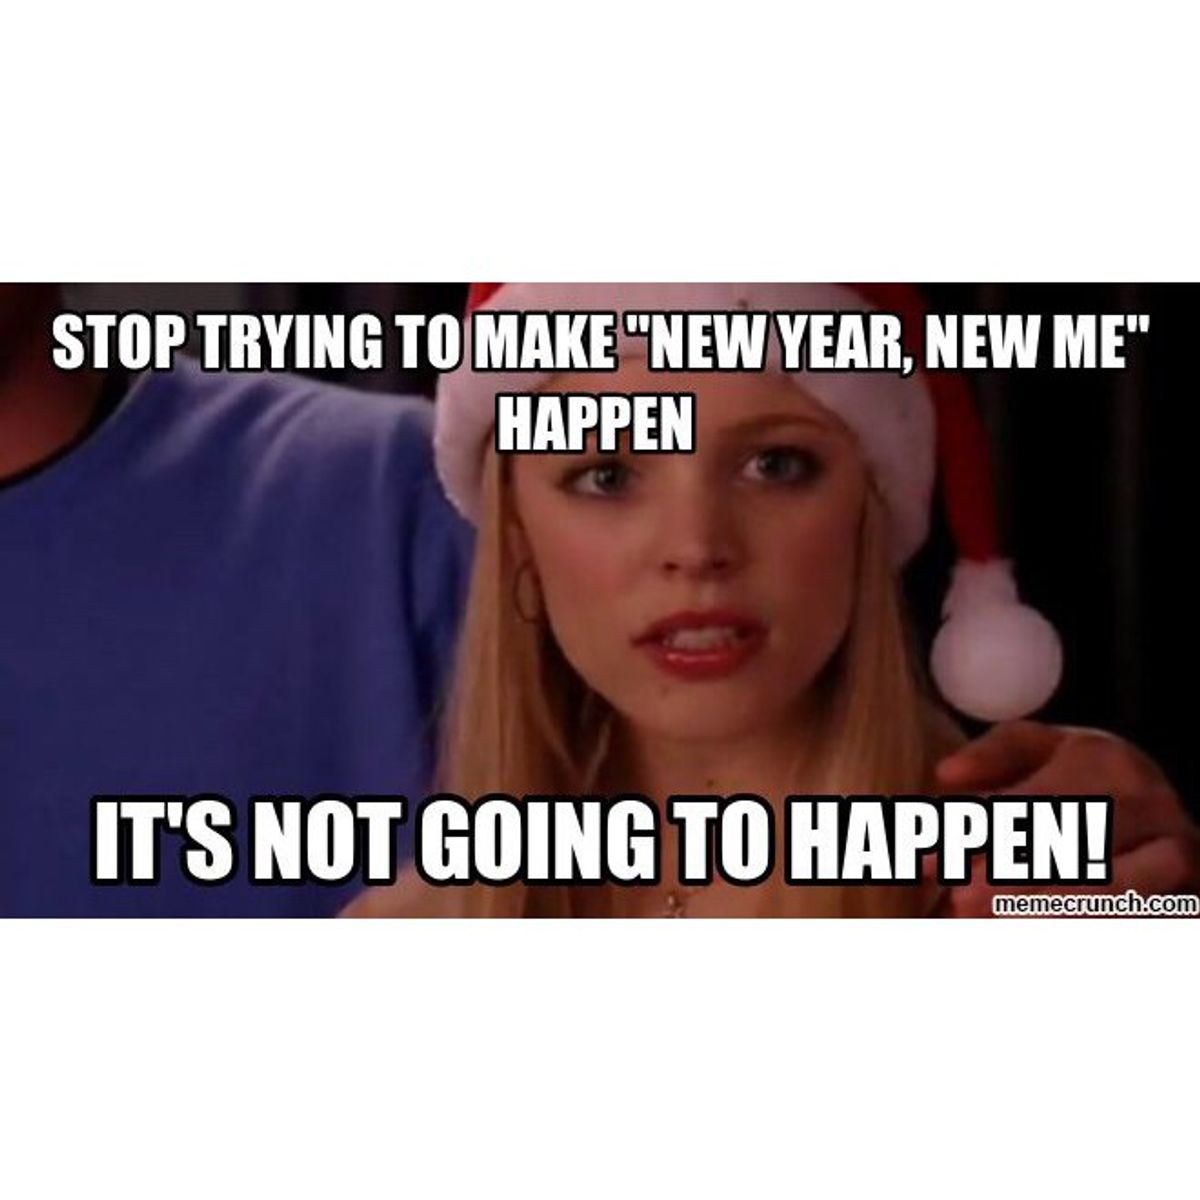 Why "New Year, New Me" is a lie